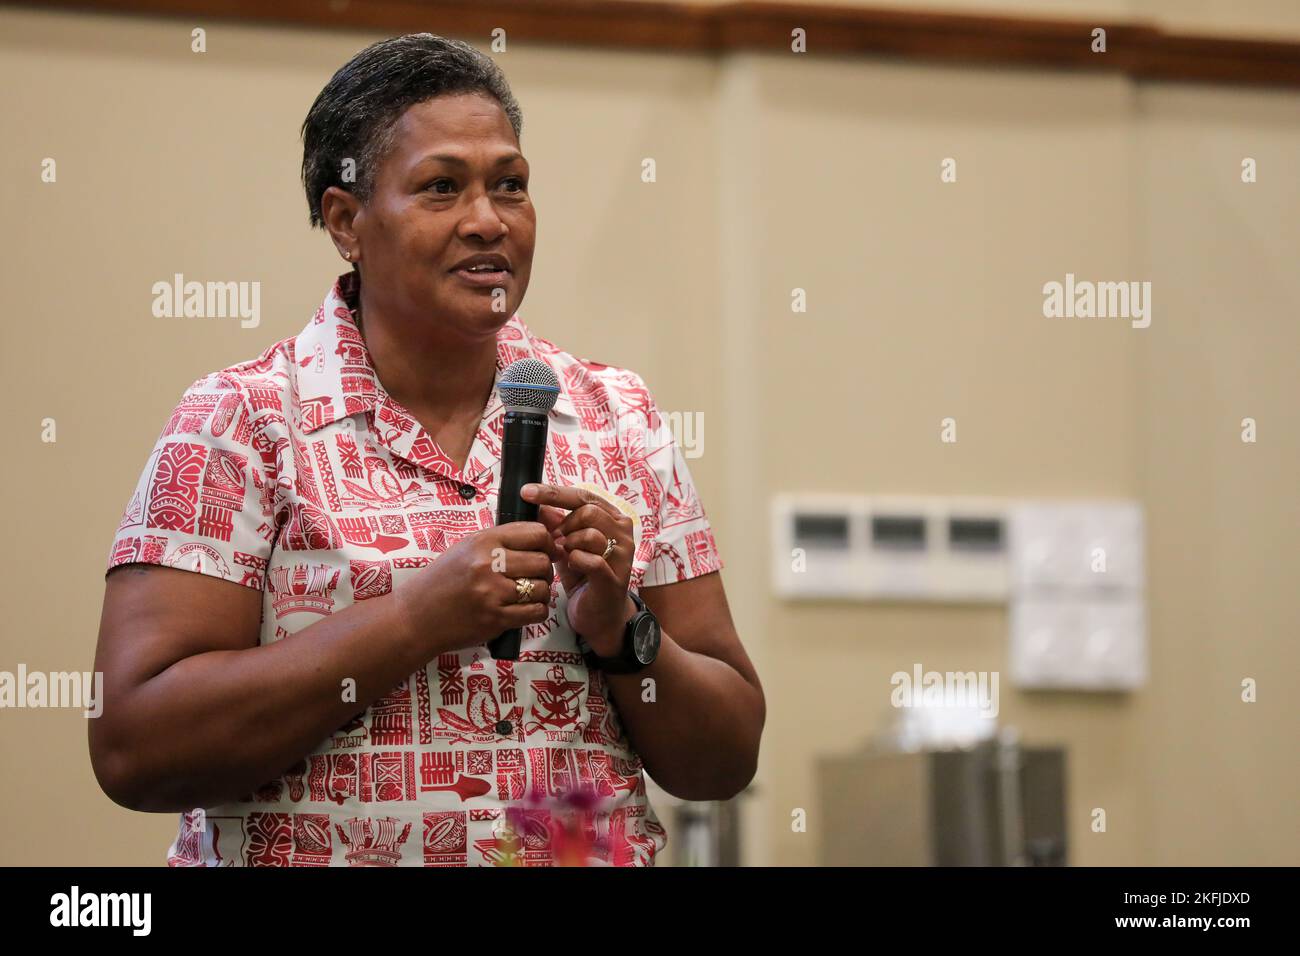 Republic of Fiji Military Forces Col. Siliva Vananalagi speaks at the Fiji Women, Peace and Security National Action Plan Orientation Workshop in Suva, Fiji, Sept. 20, 2022. Facilitated by U.S. Indo-Pacific Command, the workshop consisted of Fijian government and civil society organization representatives who lead the development of a Fiji WPS National Action Plan guided by UN Security Council Resolution (UNSCR) 1325 principles and gender perspective. Stock Photo